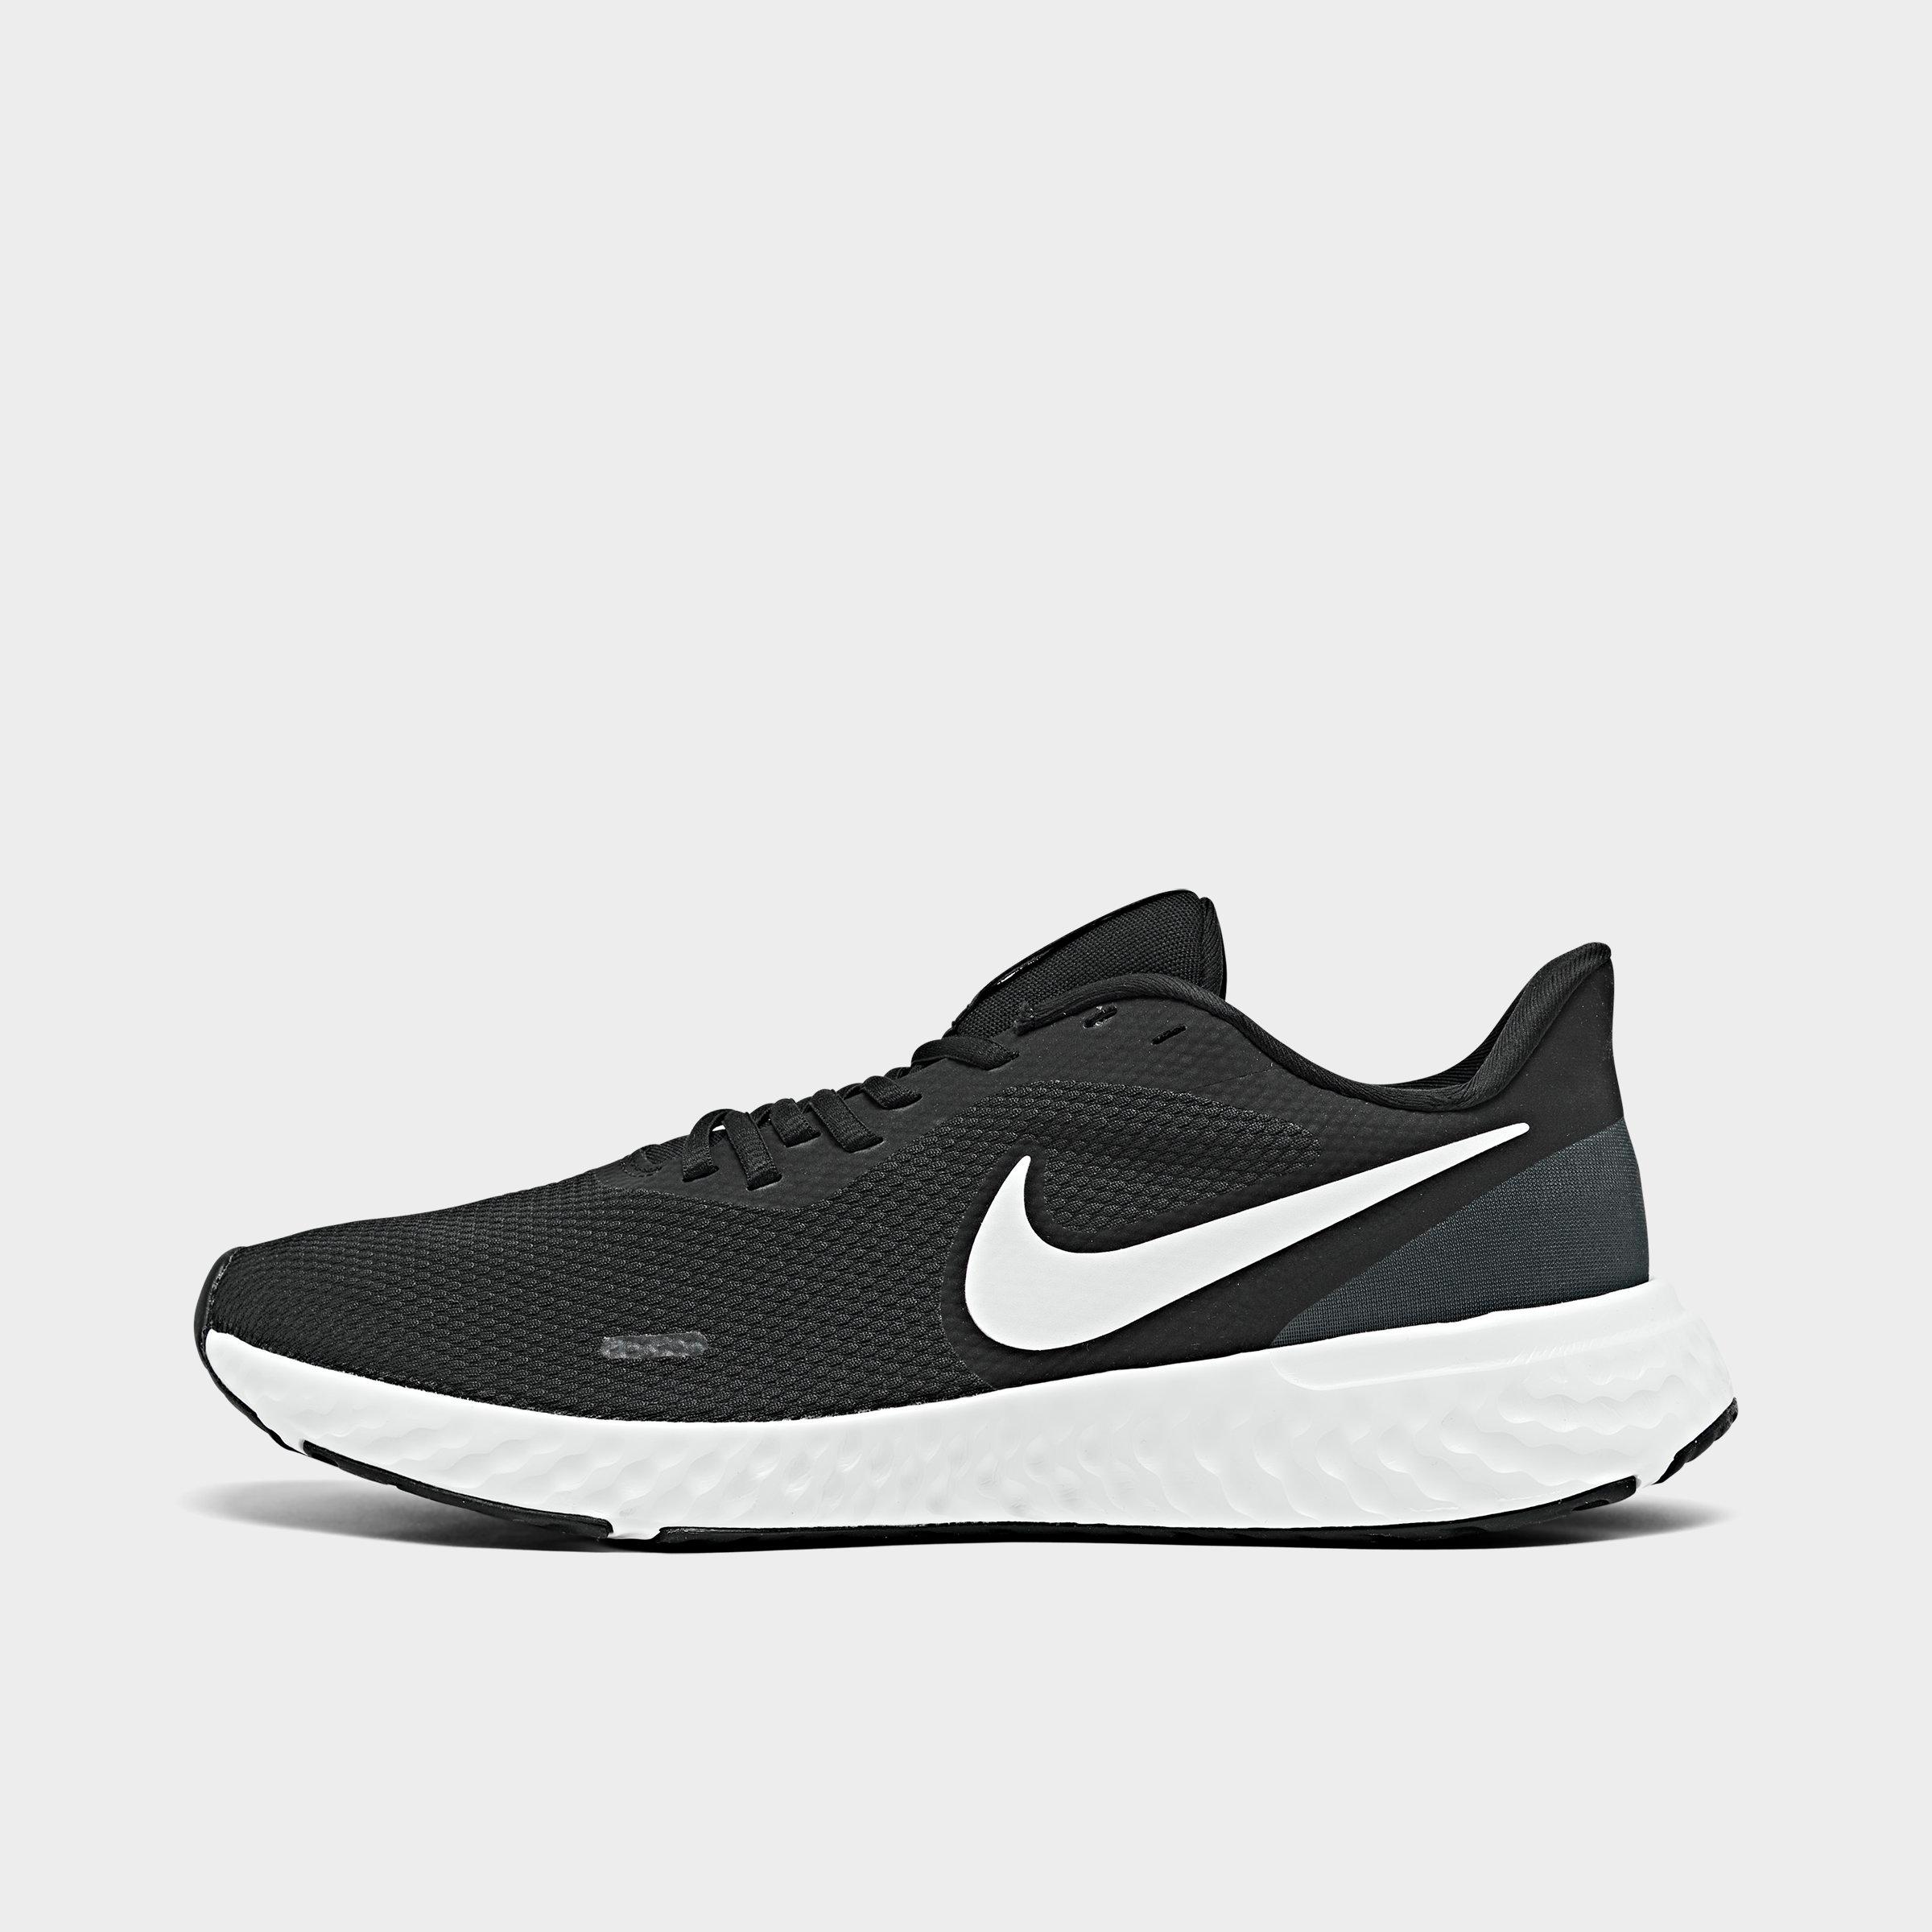 jd nike running shoes online -